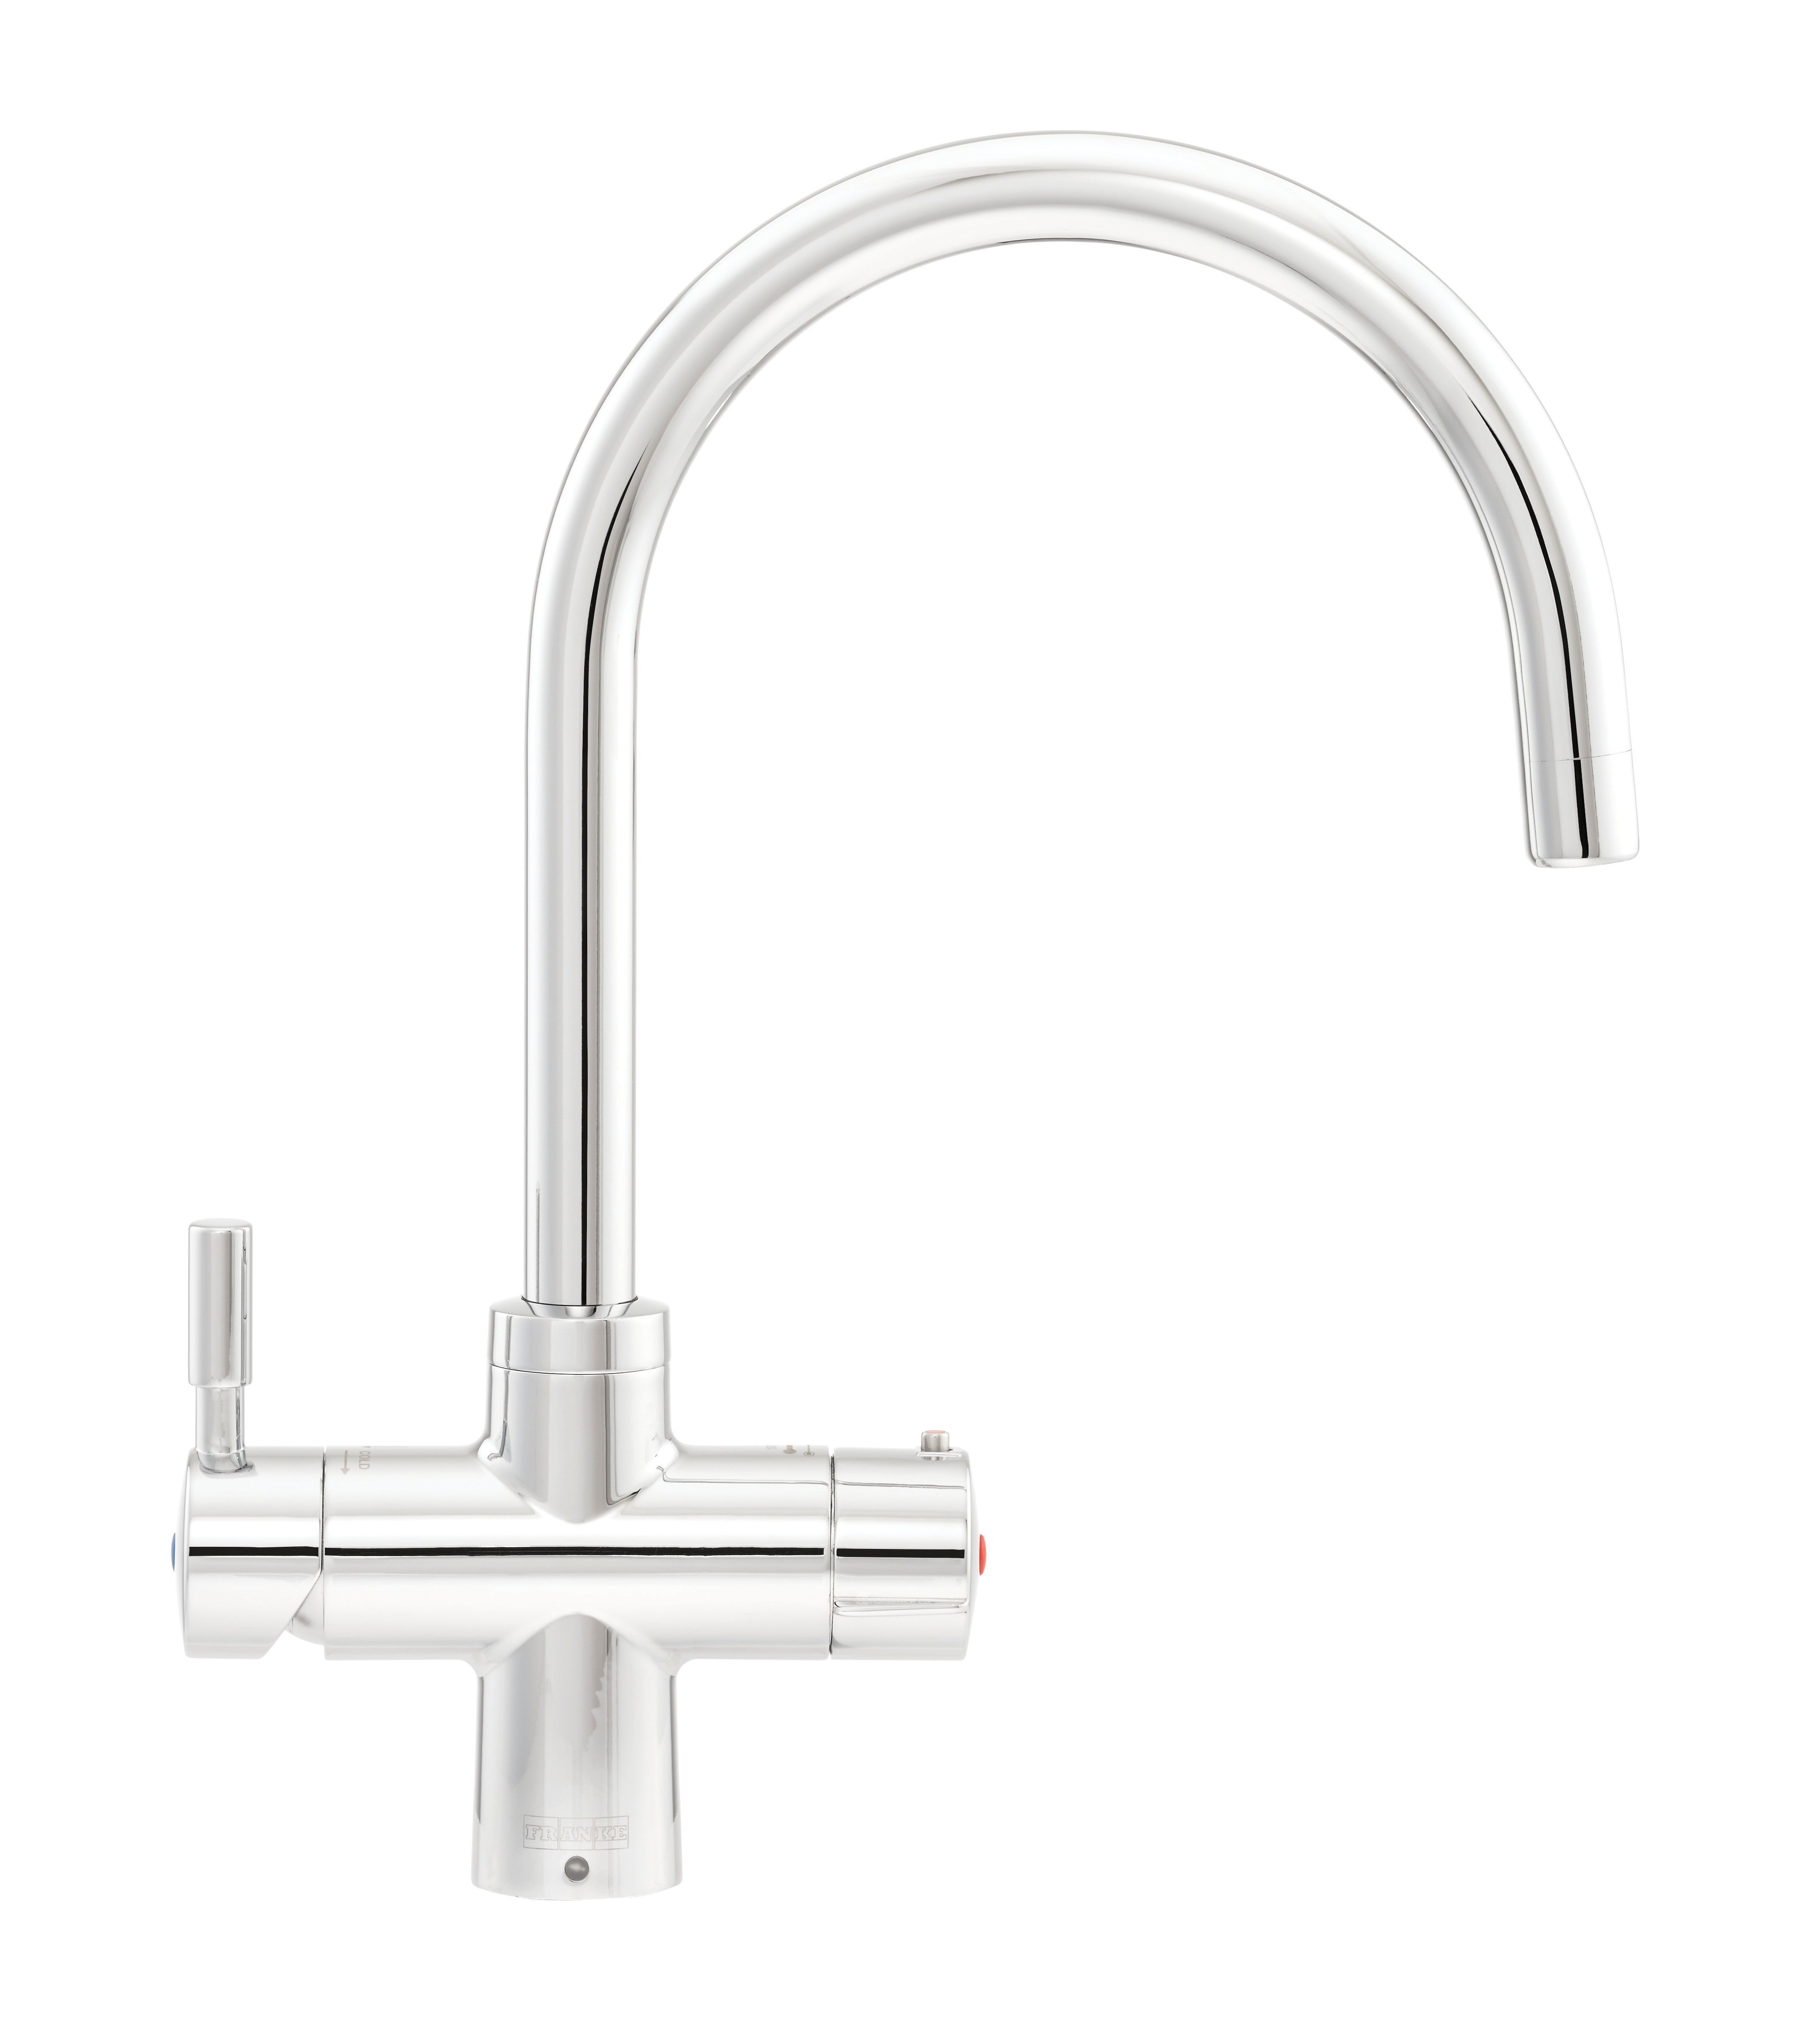 Image of Franke 3-in-1 Monobloc Instante Boiling Water Tap - Chrome